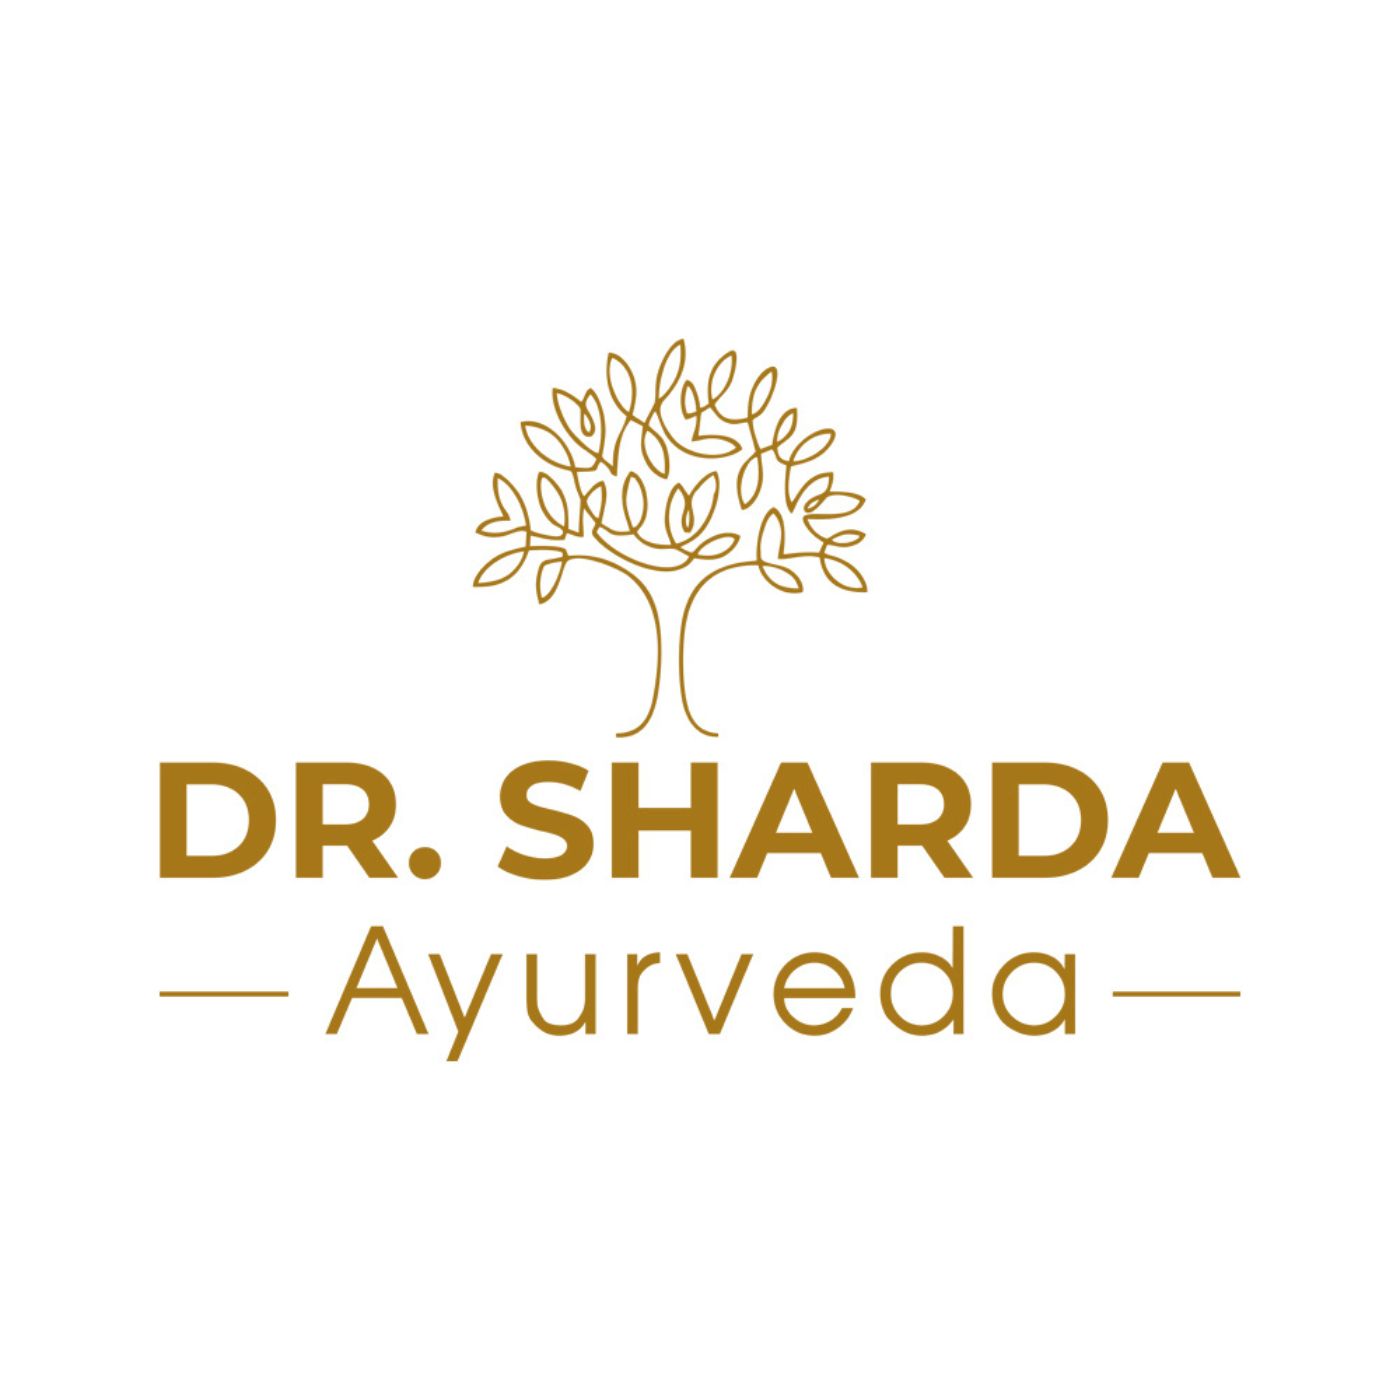 Ayurvedic, Alternative Therapy/ Medicine, Hair/ Skin care; Exp: More than 10 year